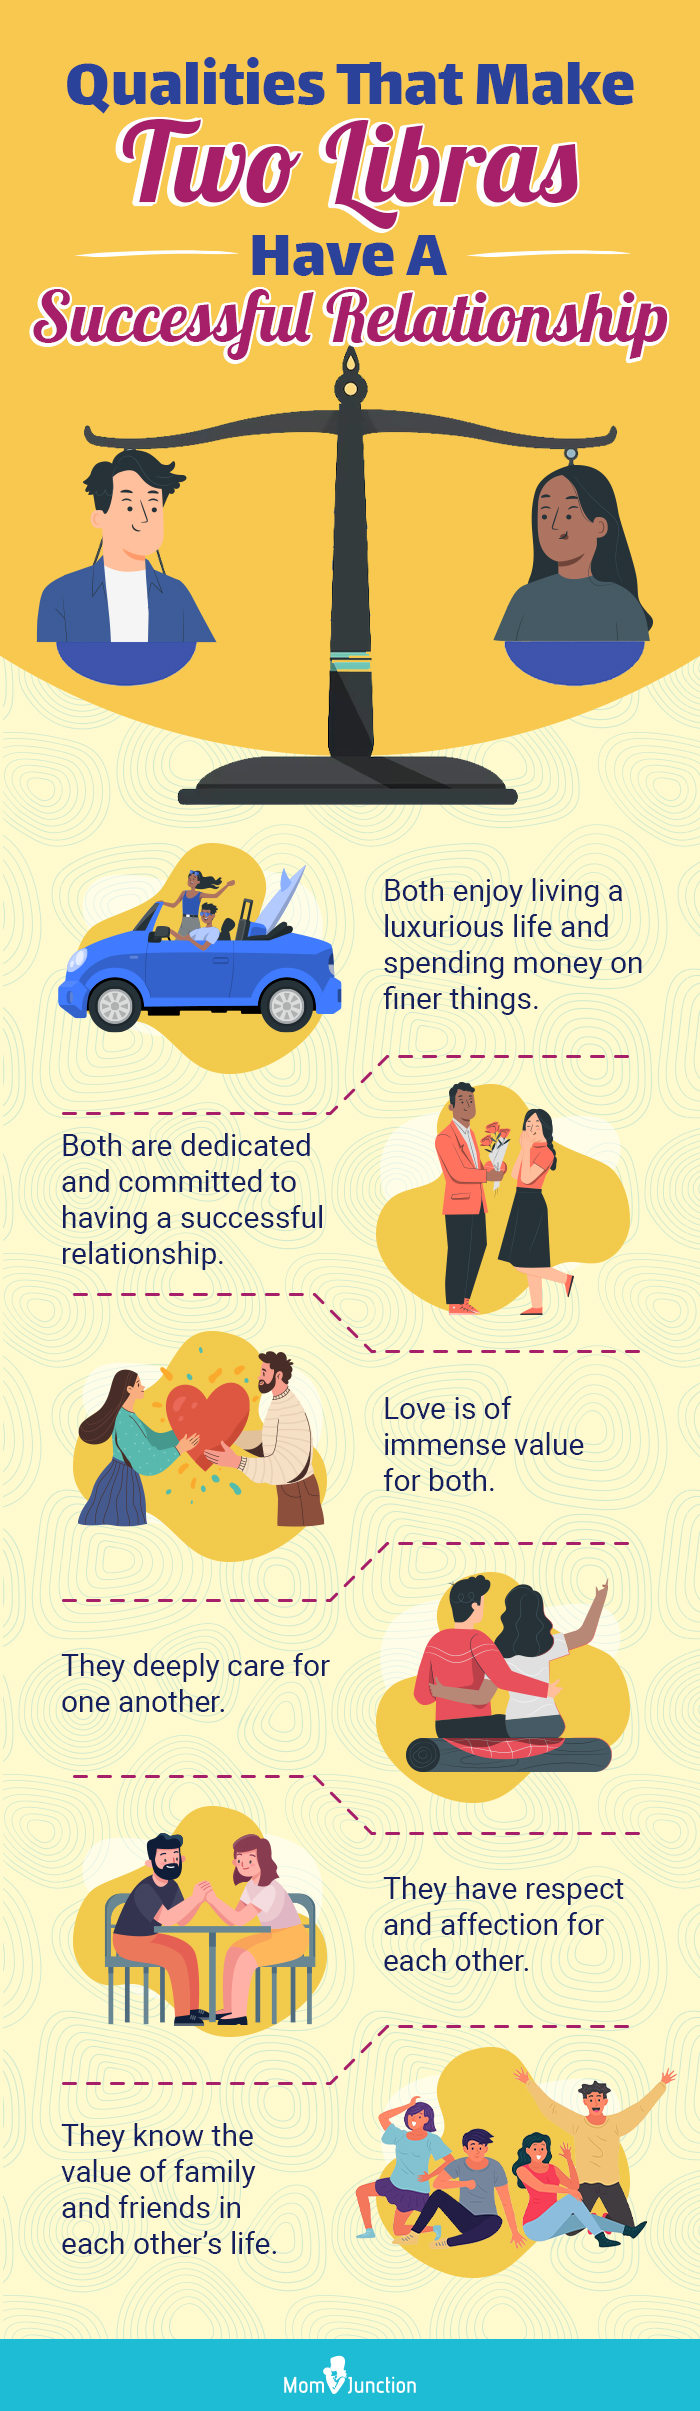 qualities that makes two libras have a successful relationship (infographic)